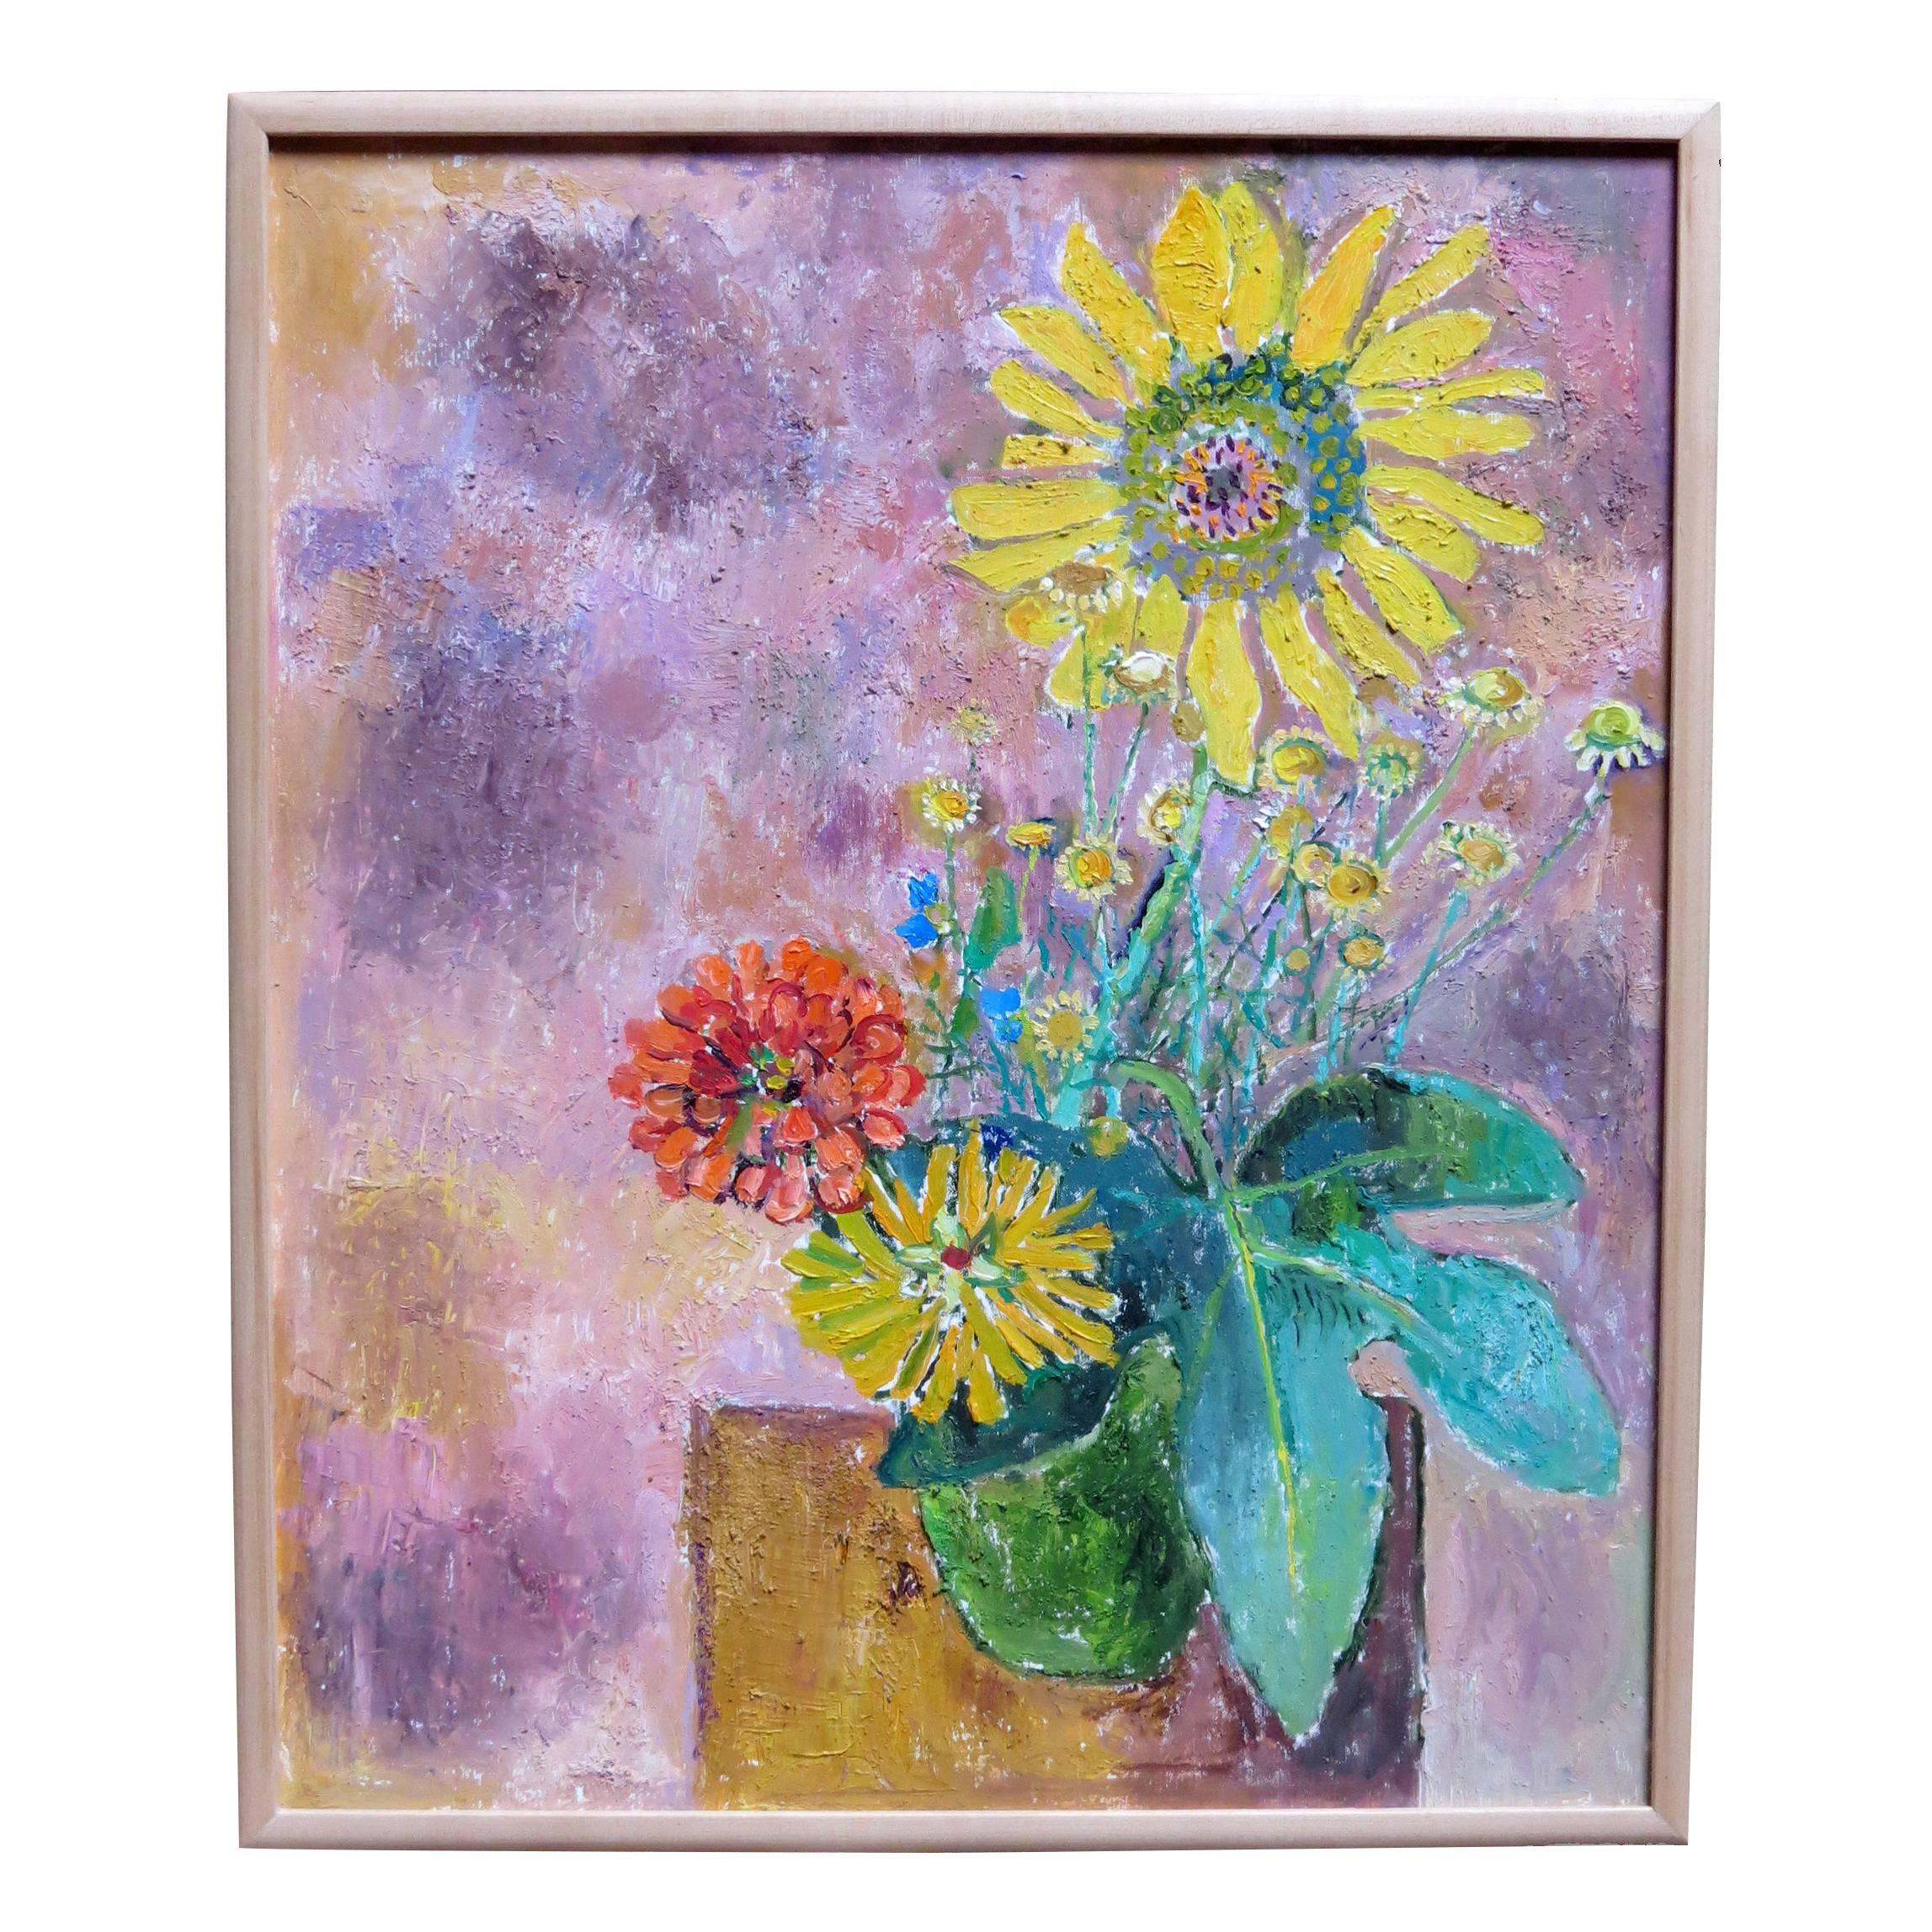 Painting by French Artist, Edouardo Mac; Avoy, 1991, "Bouquet au Toirnesol" For Sale